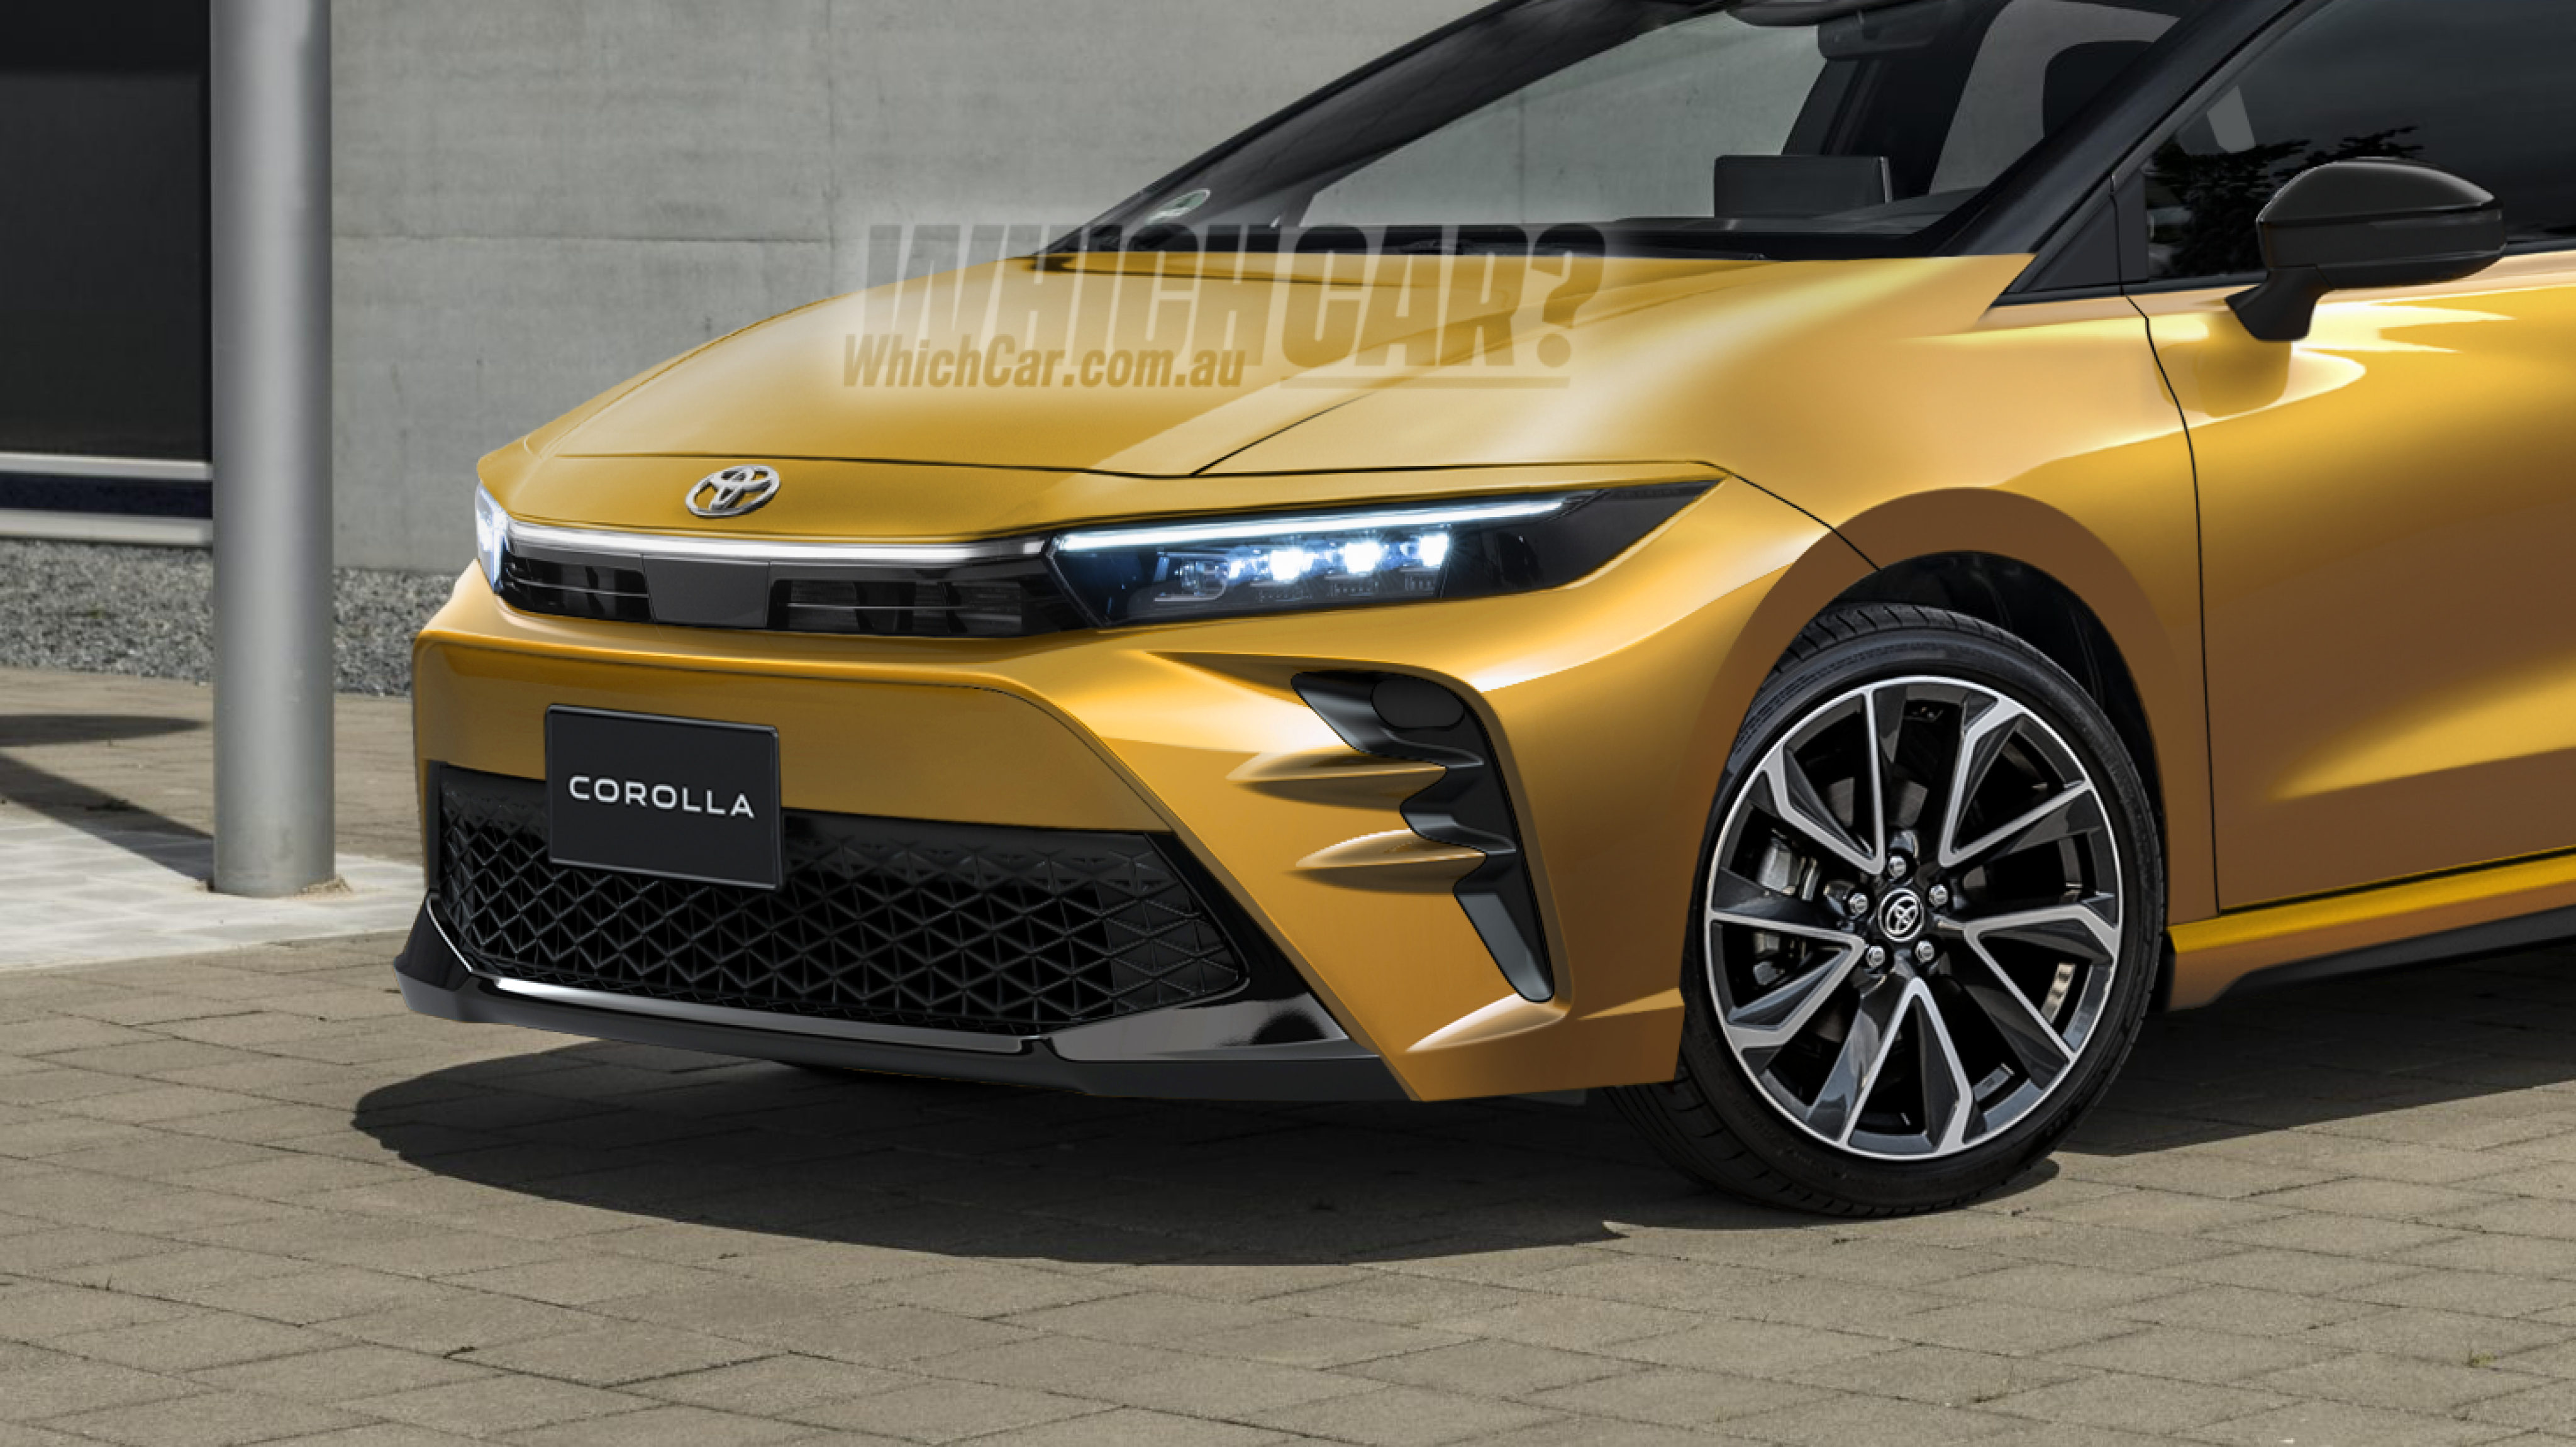 Toyota Corolla Models, Generations & Redesigns